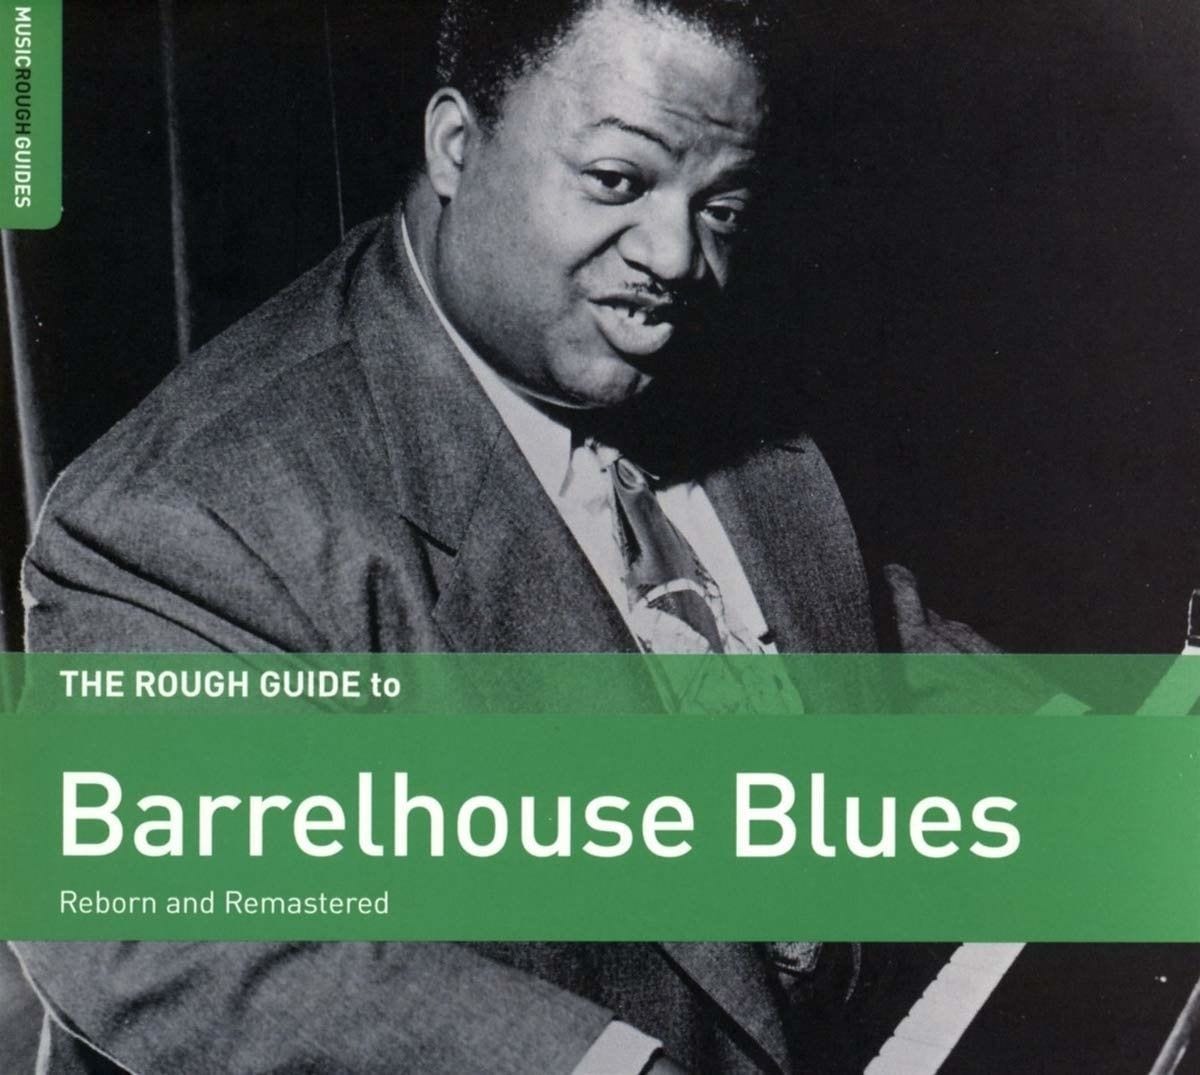 Barrelhouse Blues Powers Rock and R&B As This New Compilation Shows